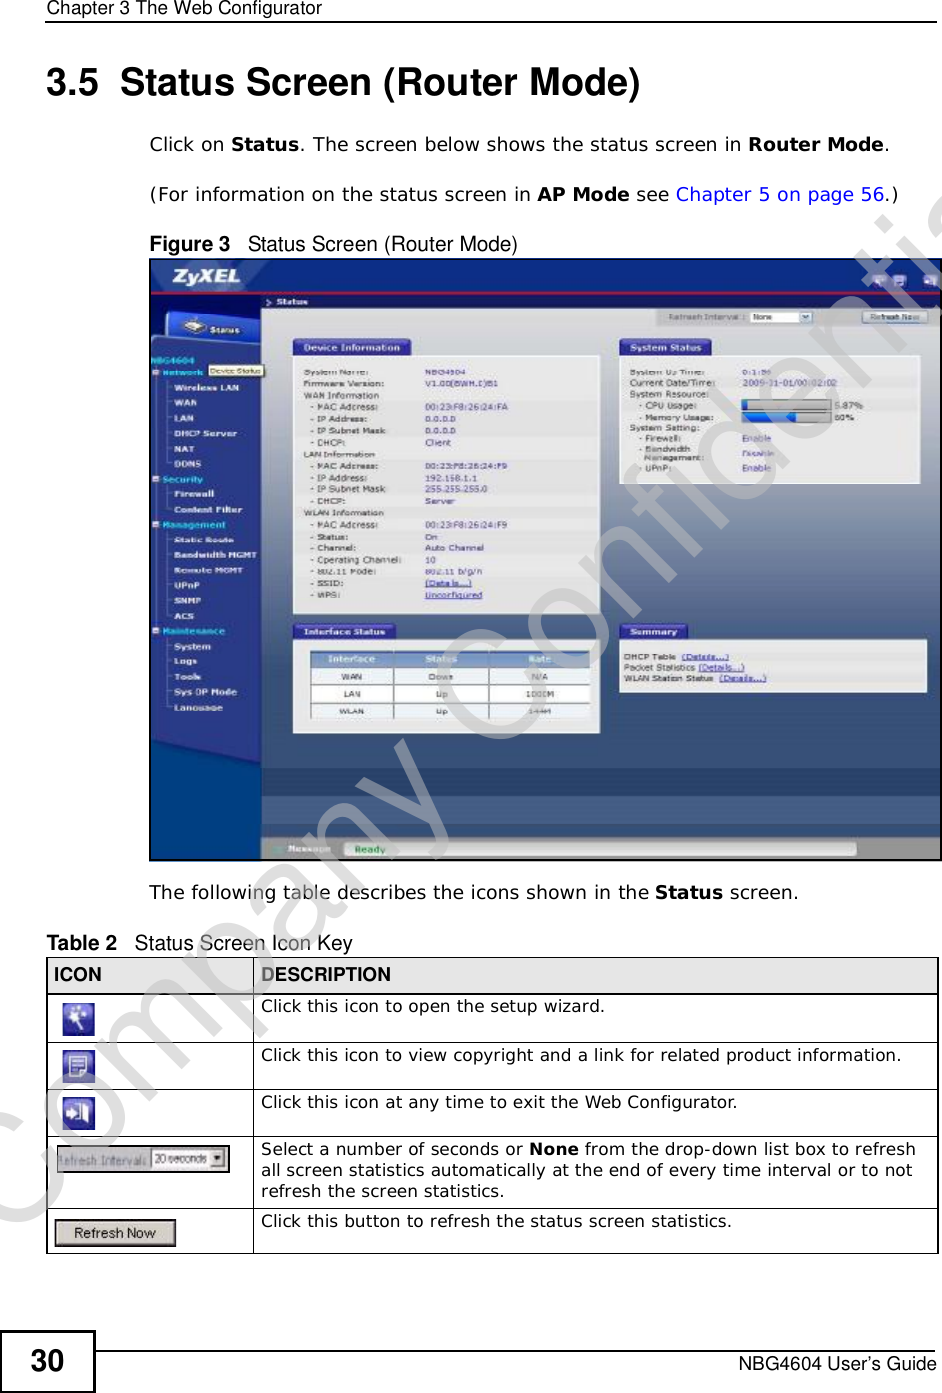 Chapter 3The Web ConfiguratorNBG4604 User’s Guide303.5  Status Screen (Router Mode)Click on Status. The screen below shows the status screen in Router Mode.(For information on the status screen in AP Mode see Chapter 5 on page 56.)Figure 3   Status Screen (Router Mode) The following table describes the icons shown in the Status screen.Table 2   Status Screen Icon Key ICON DESCRIPTIONClick this icon to open the setup wizard. Click this icon to view copyright and a link for related product information.Click this icon at any time to exit the Web Configurator.Select a number of seconds or None from the drop-down list box to refresh all screen statistics automatically at the end of every time interval or to not refresh the screen statistics.Click this button to refresh the status screen statistics.Company Confidential